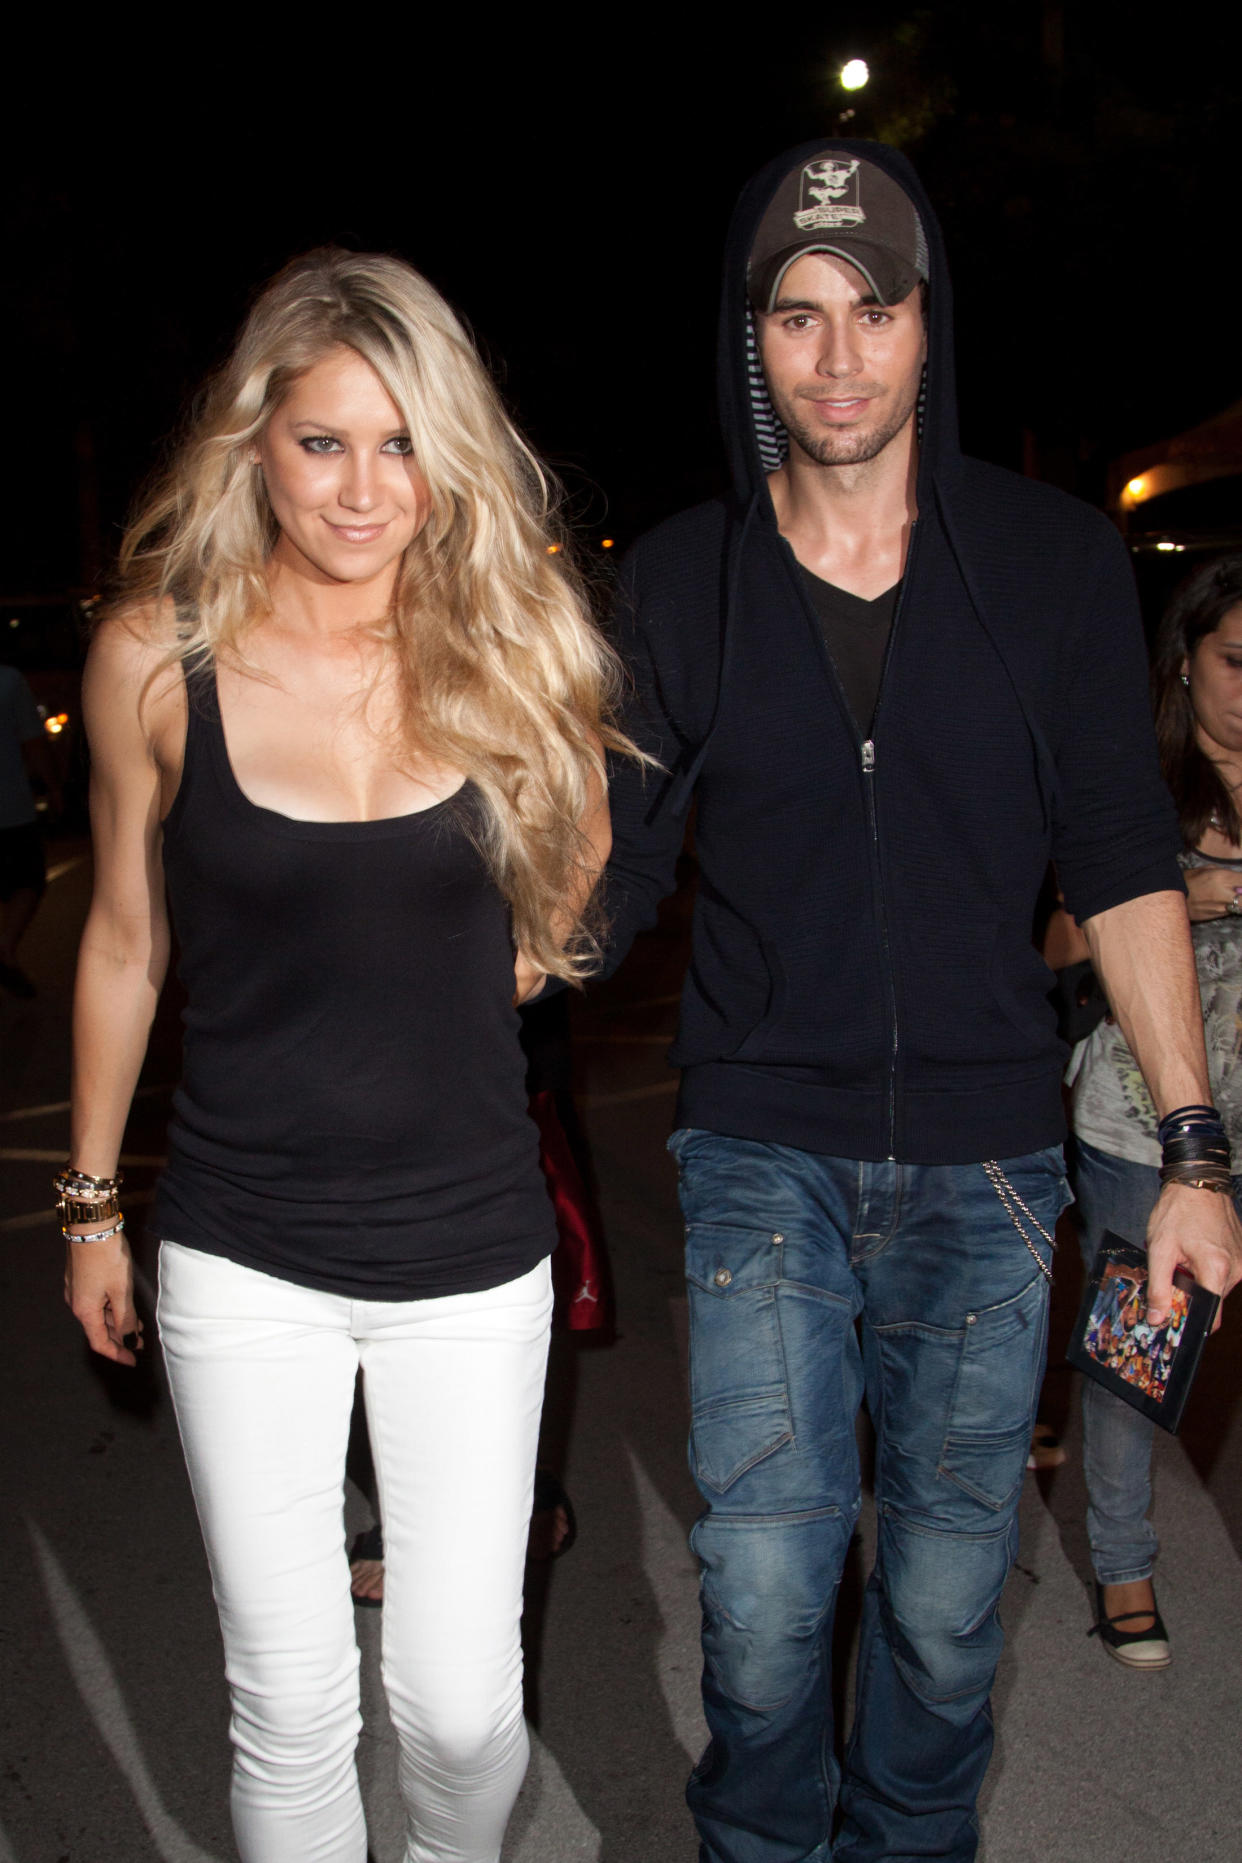 Anna Kournikova and Enrique Iglesias, pictured in 2010, have shared snaps of their babies. (Photo: Getty Images)